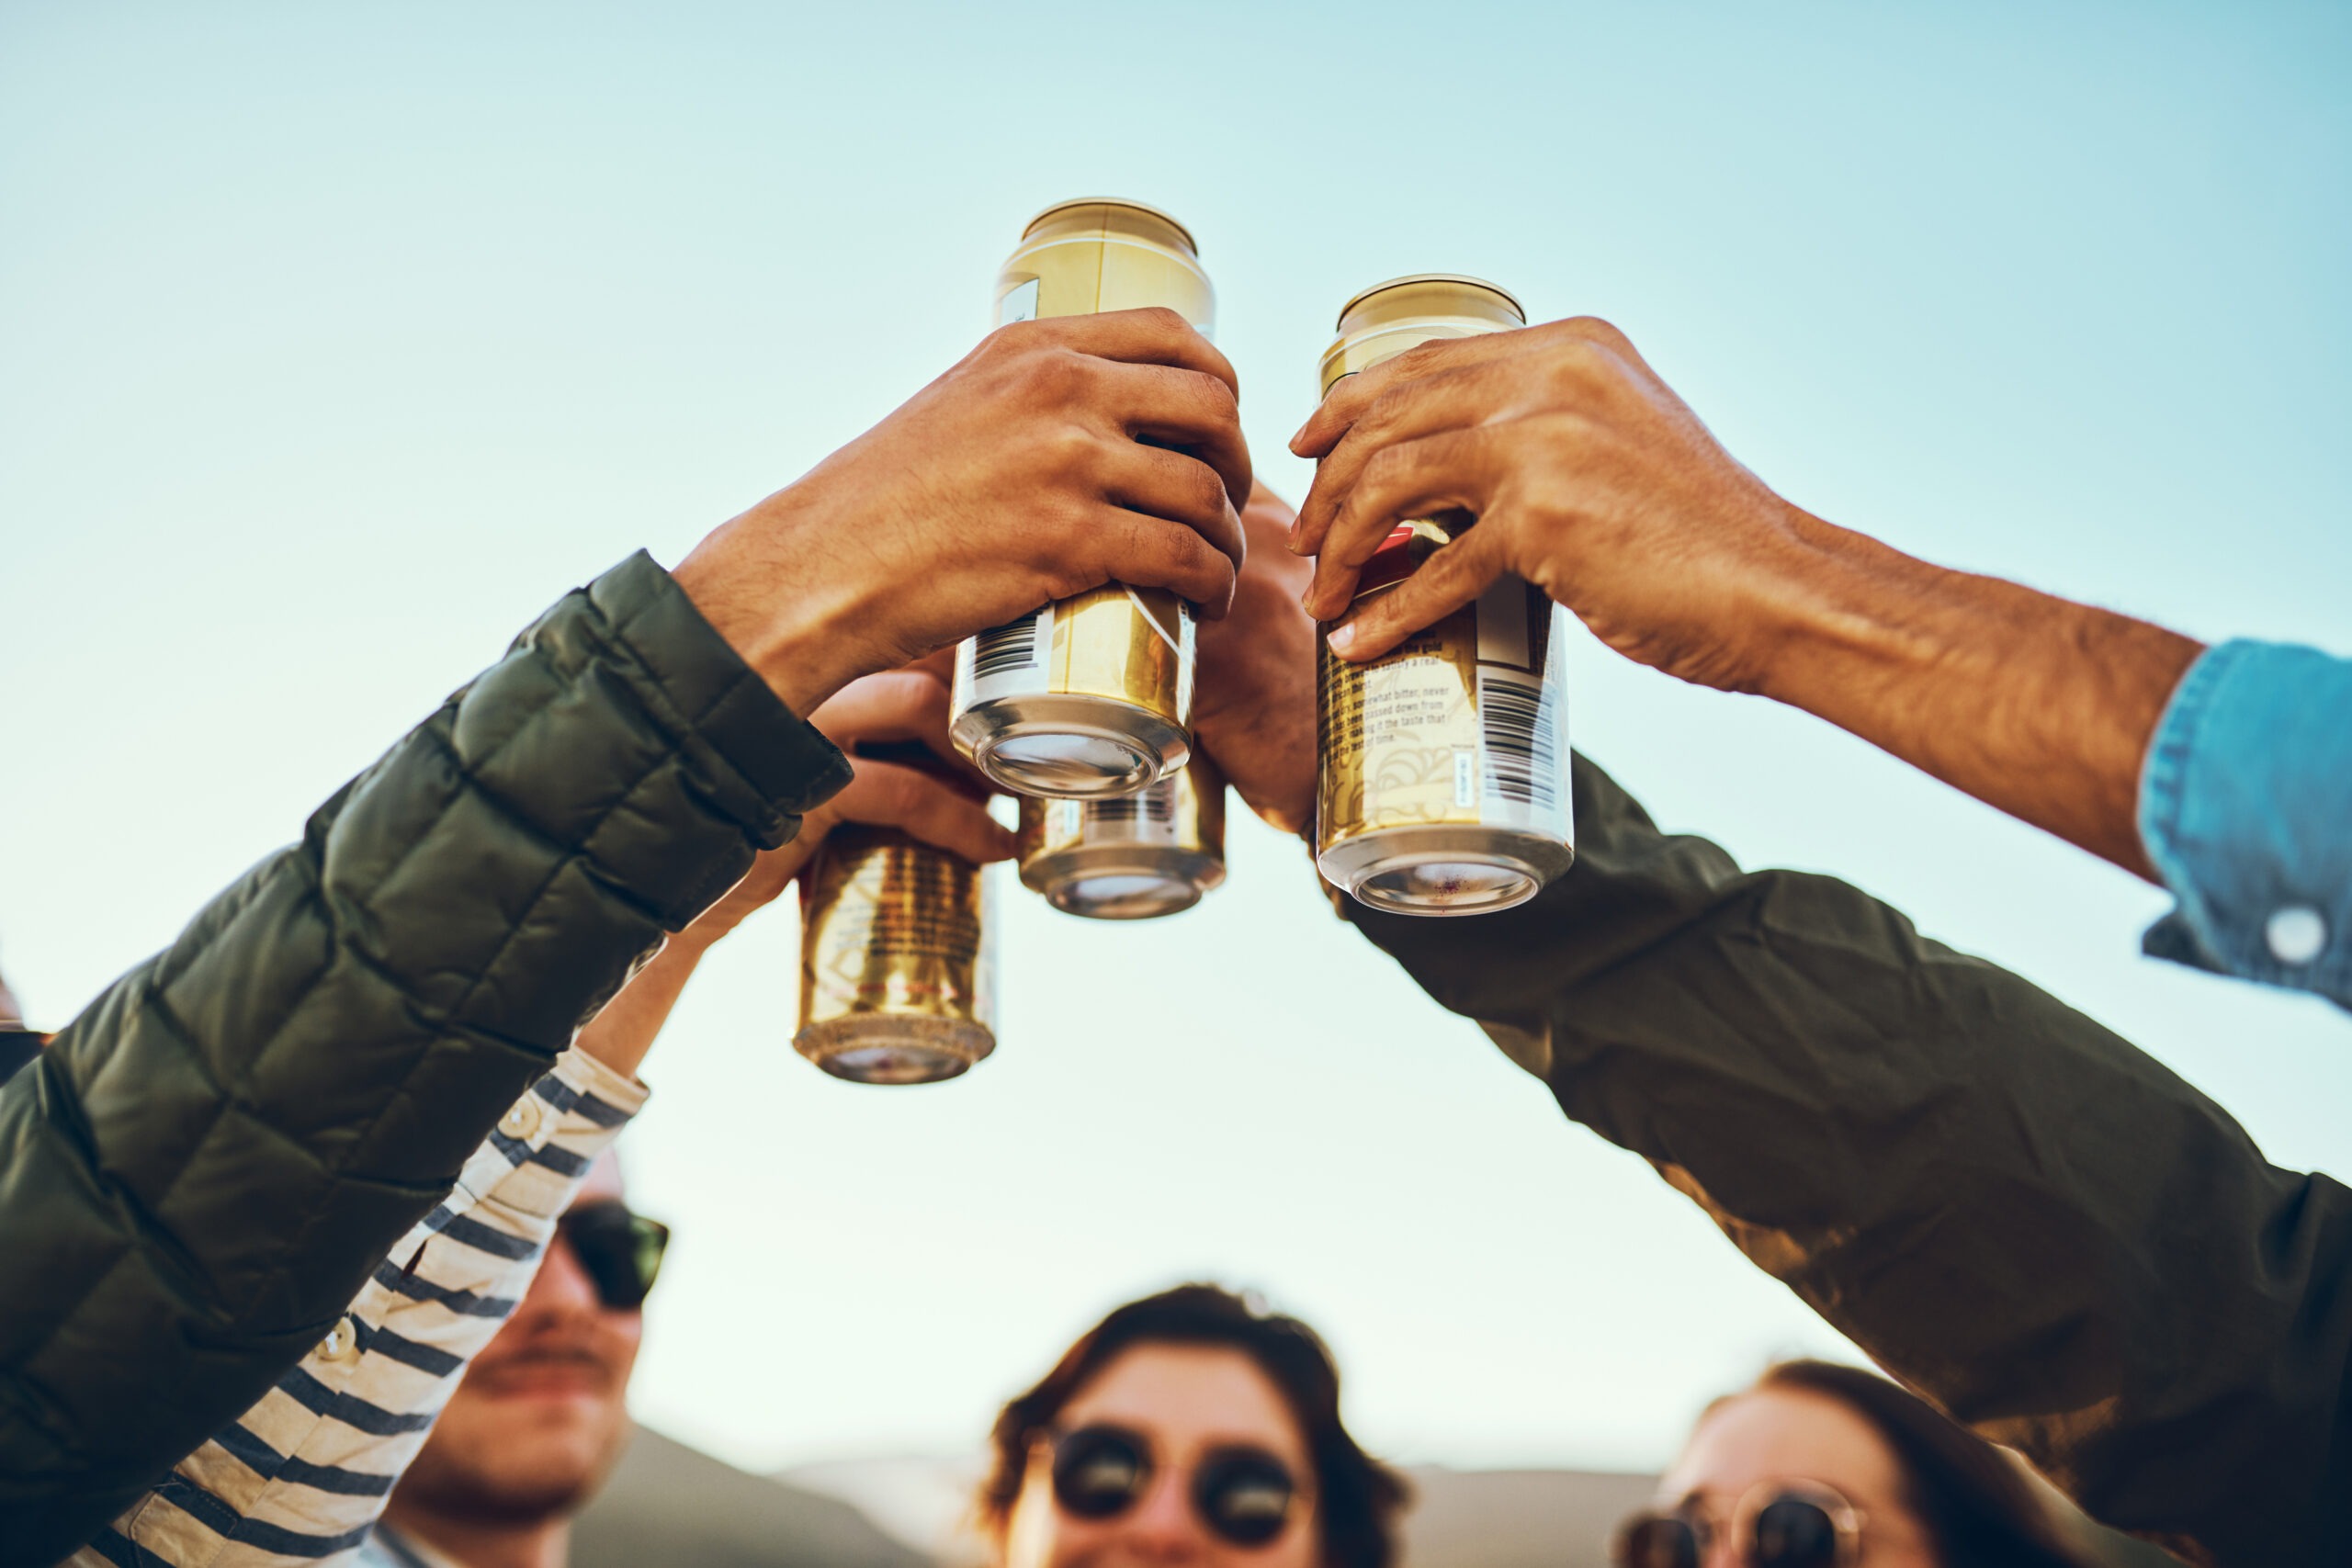 Low angle shot of a group of young friends cheersing with beers while enjoying their day out on the beach